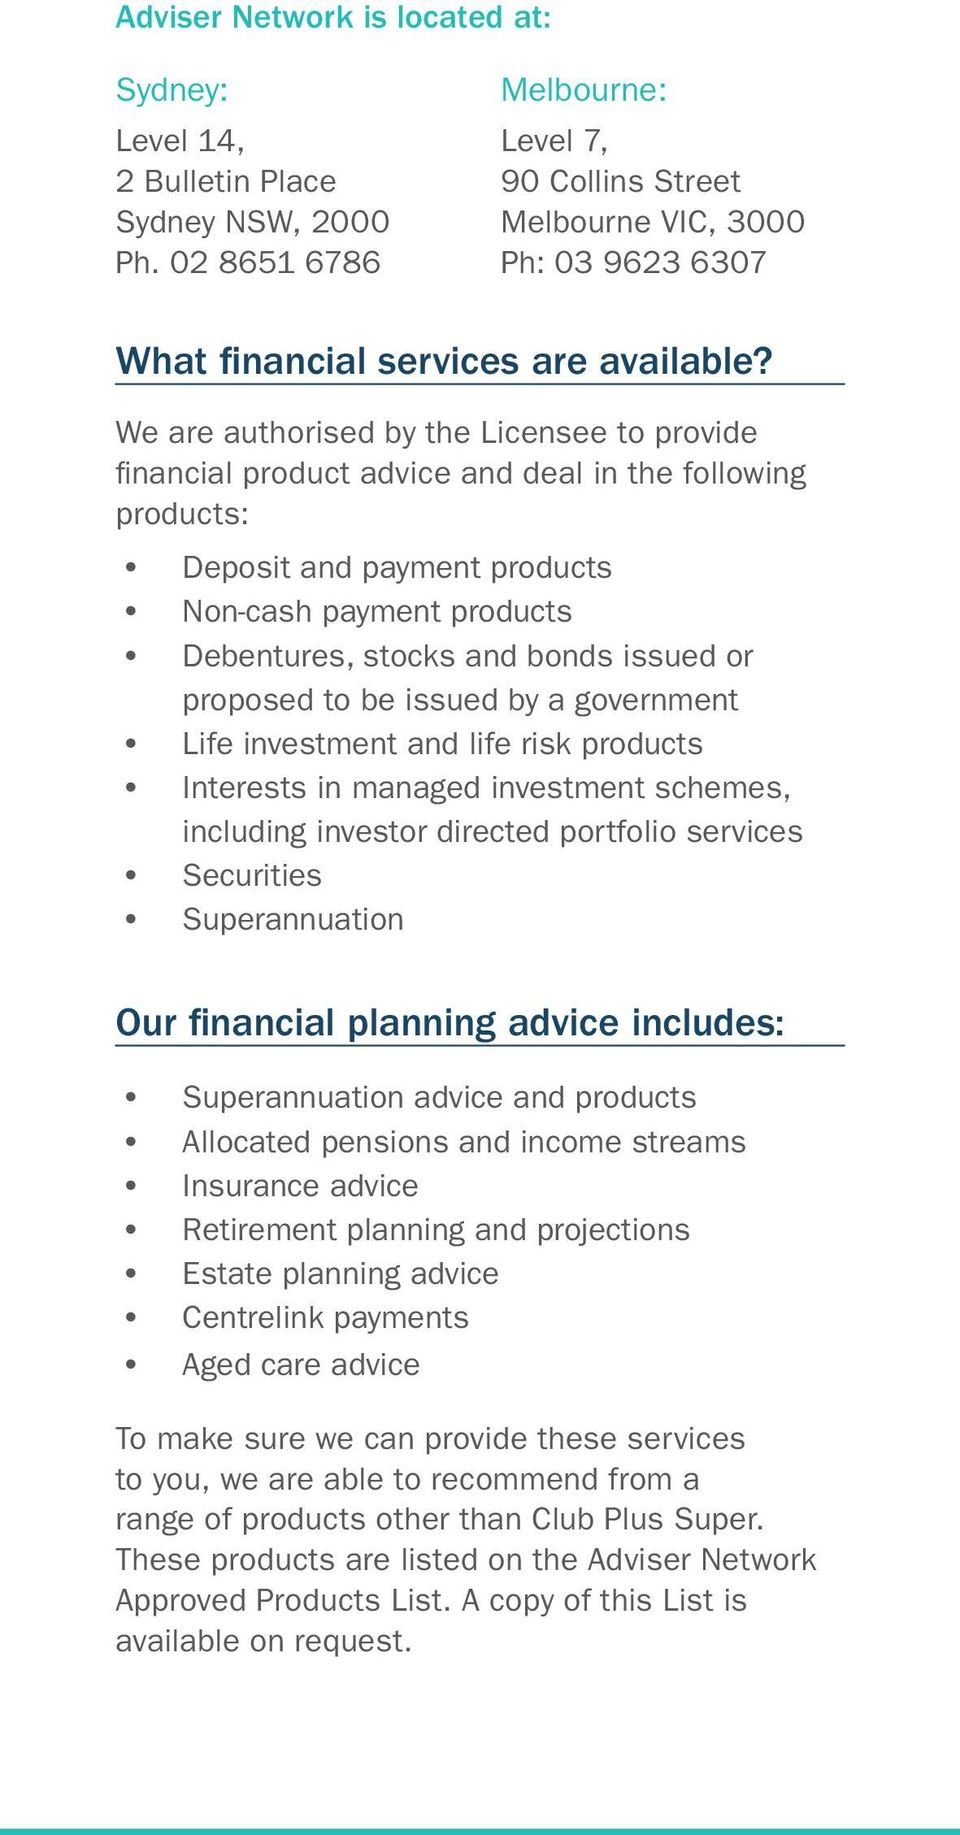 We are authorised by the Licensee to provide financial product advice and deal in the following products: Deposit and payment products Non-cash payment products Debentures, stocks and bonds issued or